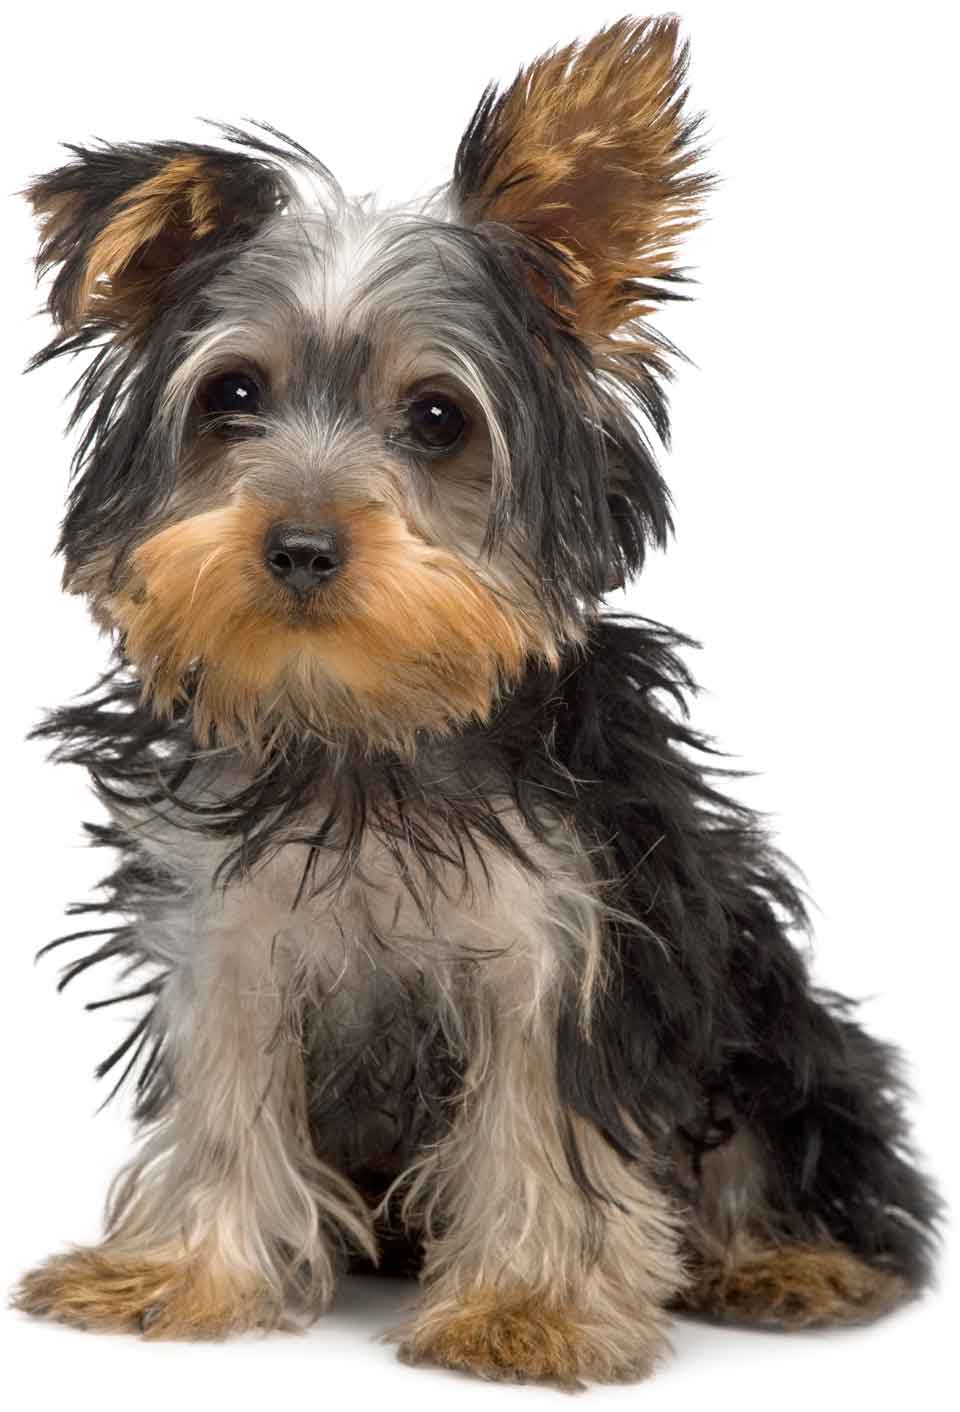 Picture of a Yorkshire Terrier puppy.   